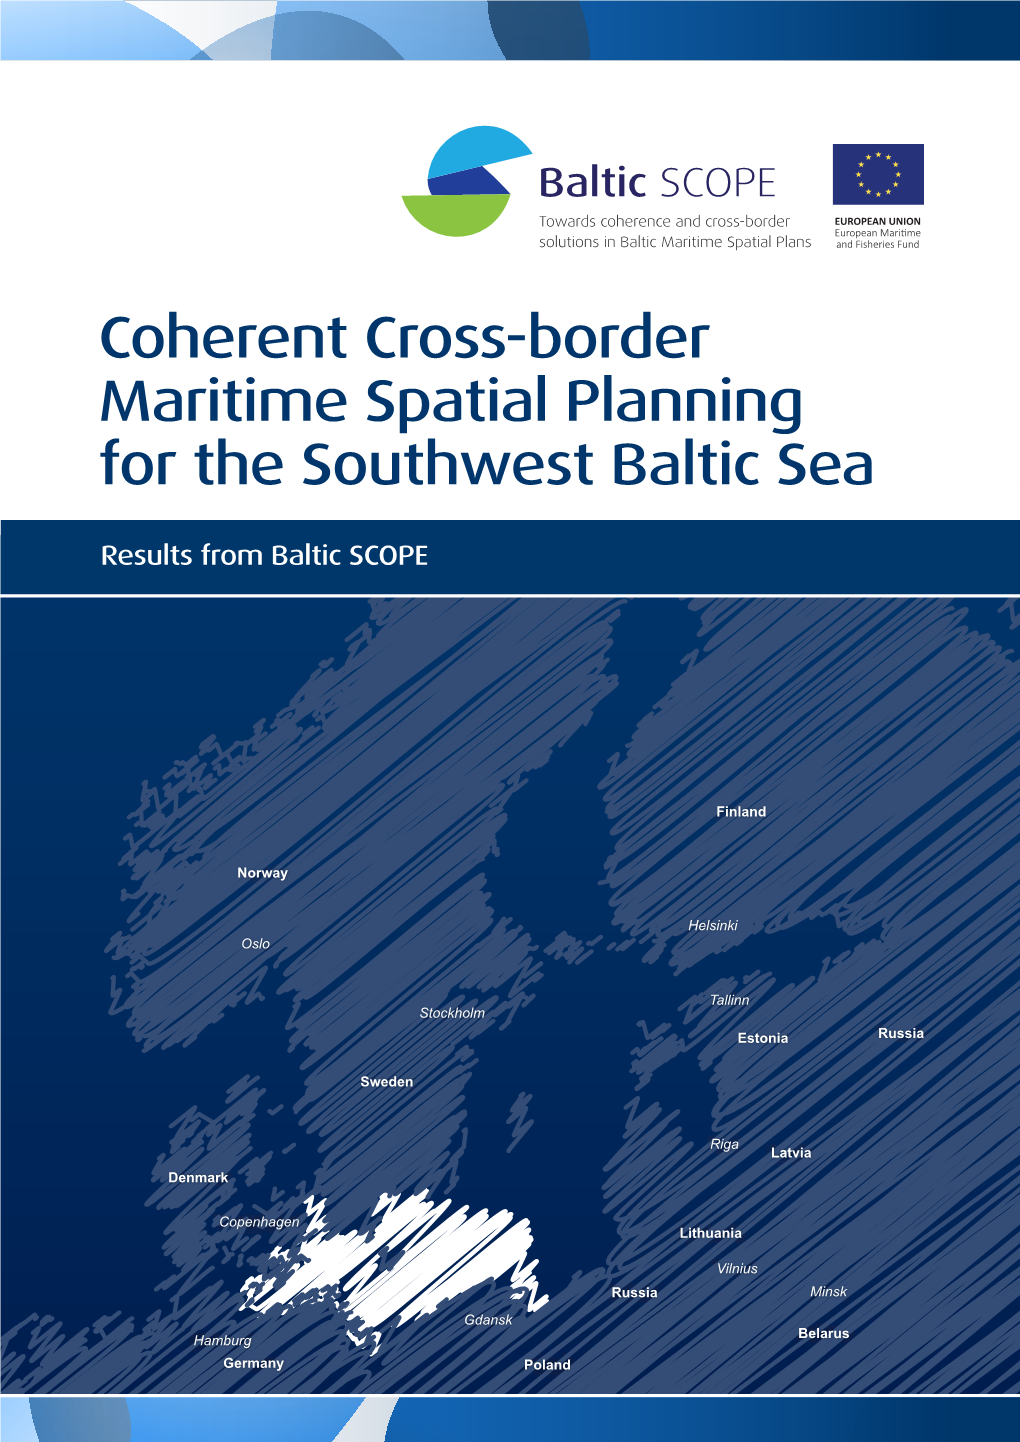 Coherent Cross-Border Maritime Spatial Planning for the Southwest Baltic Sea